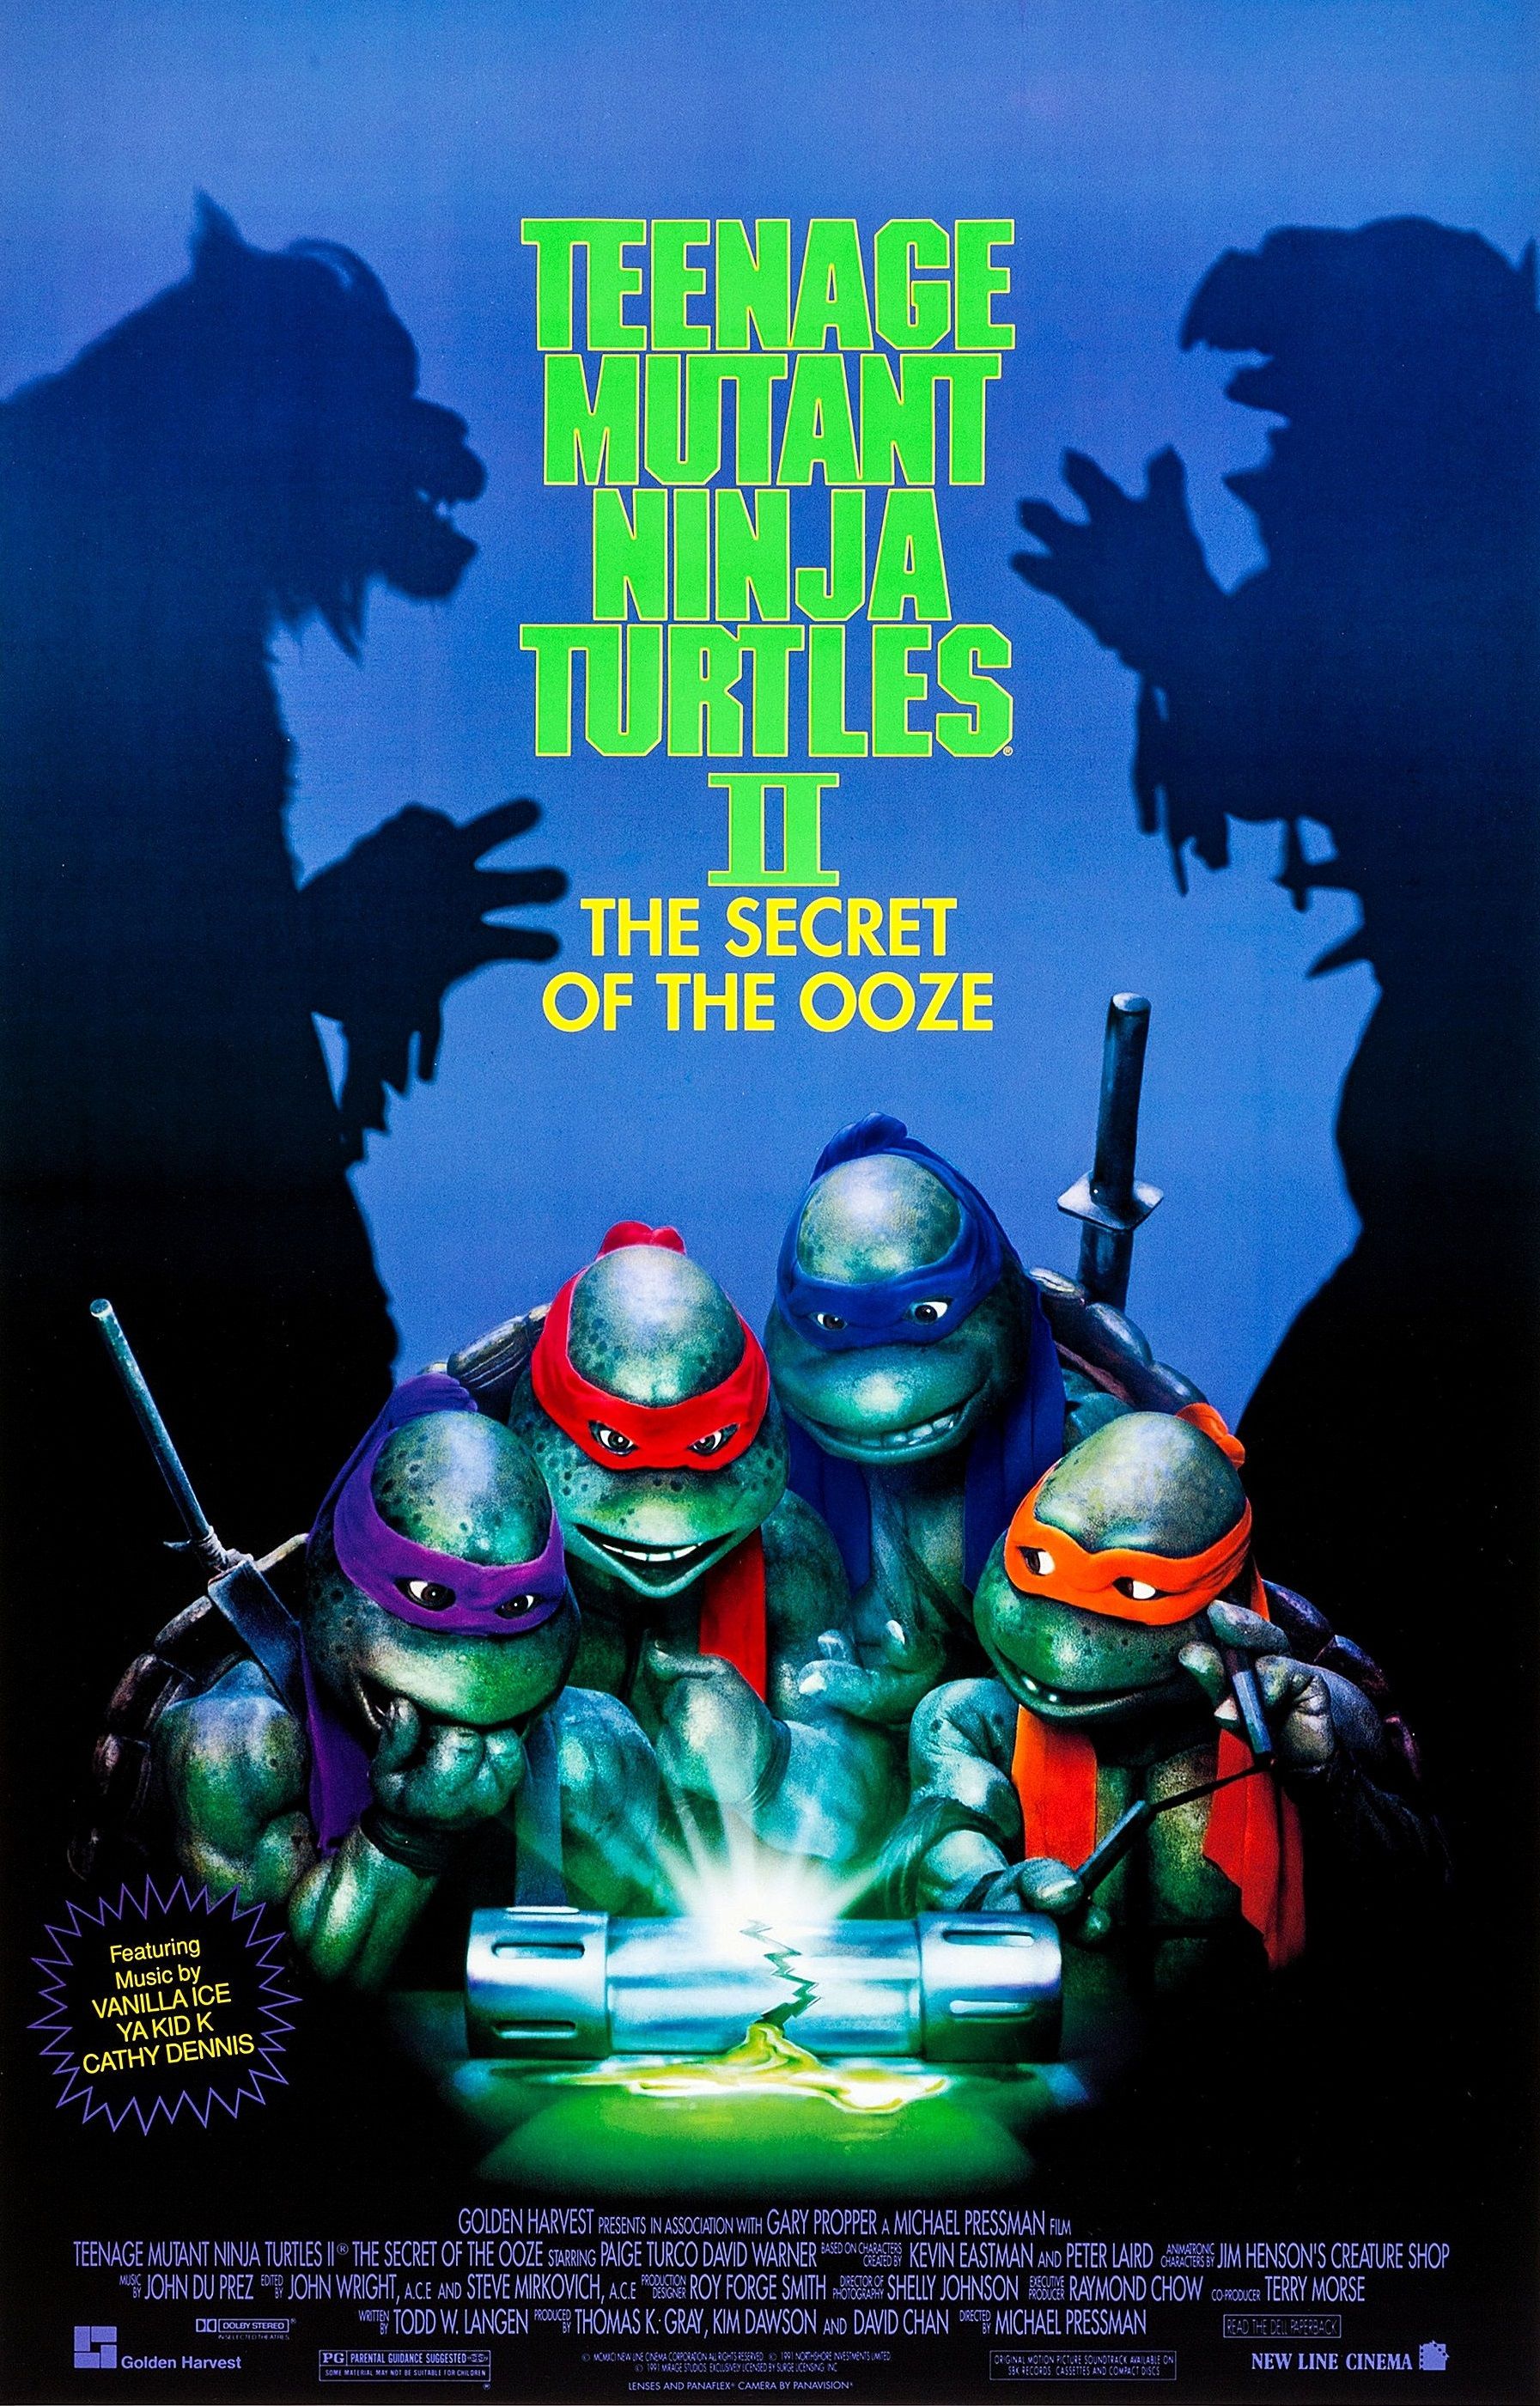 TMNT: Mutant Mayhem, Hypnotic, and every new movie to watch at